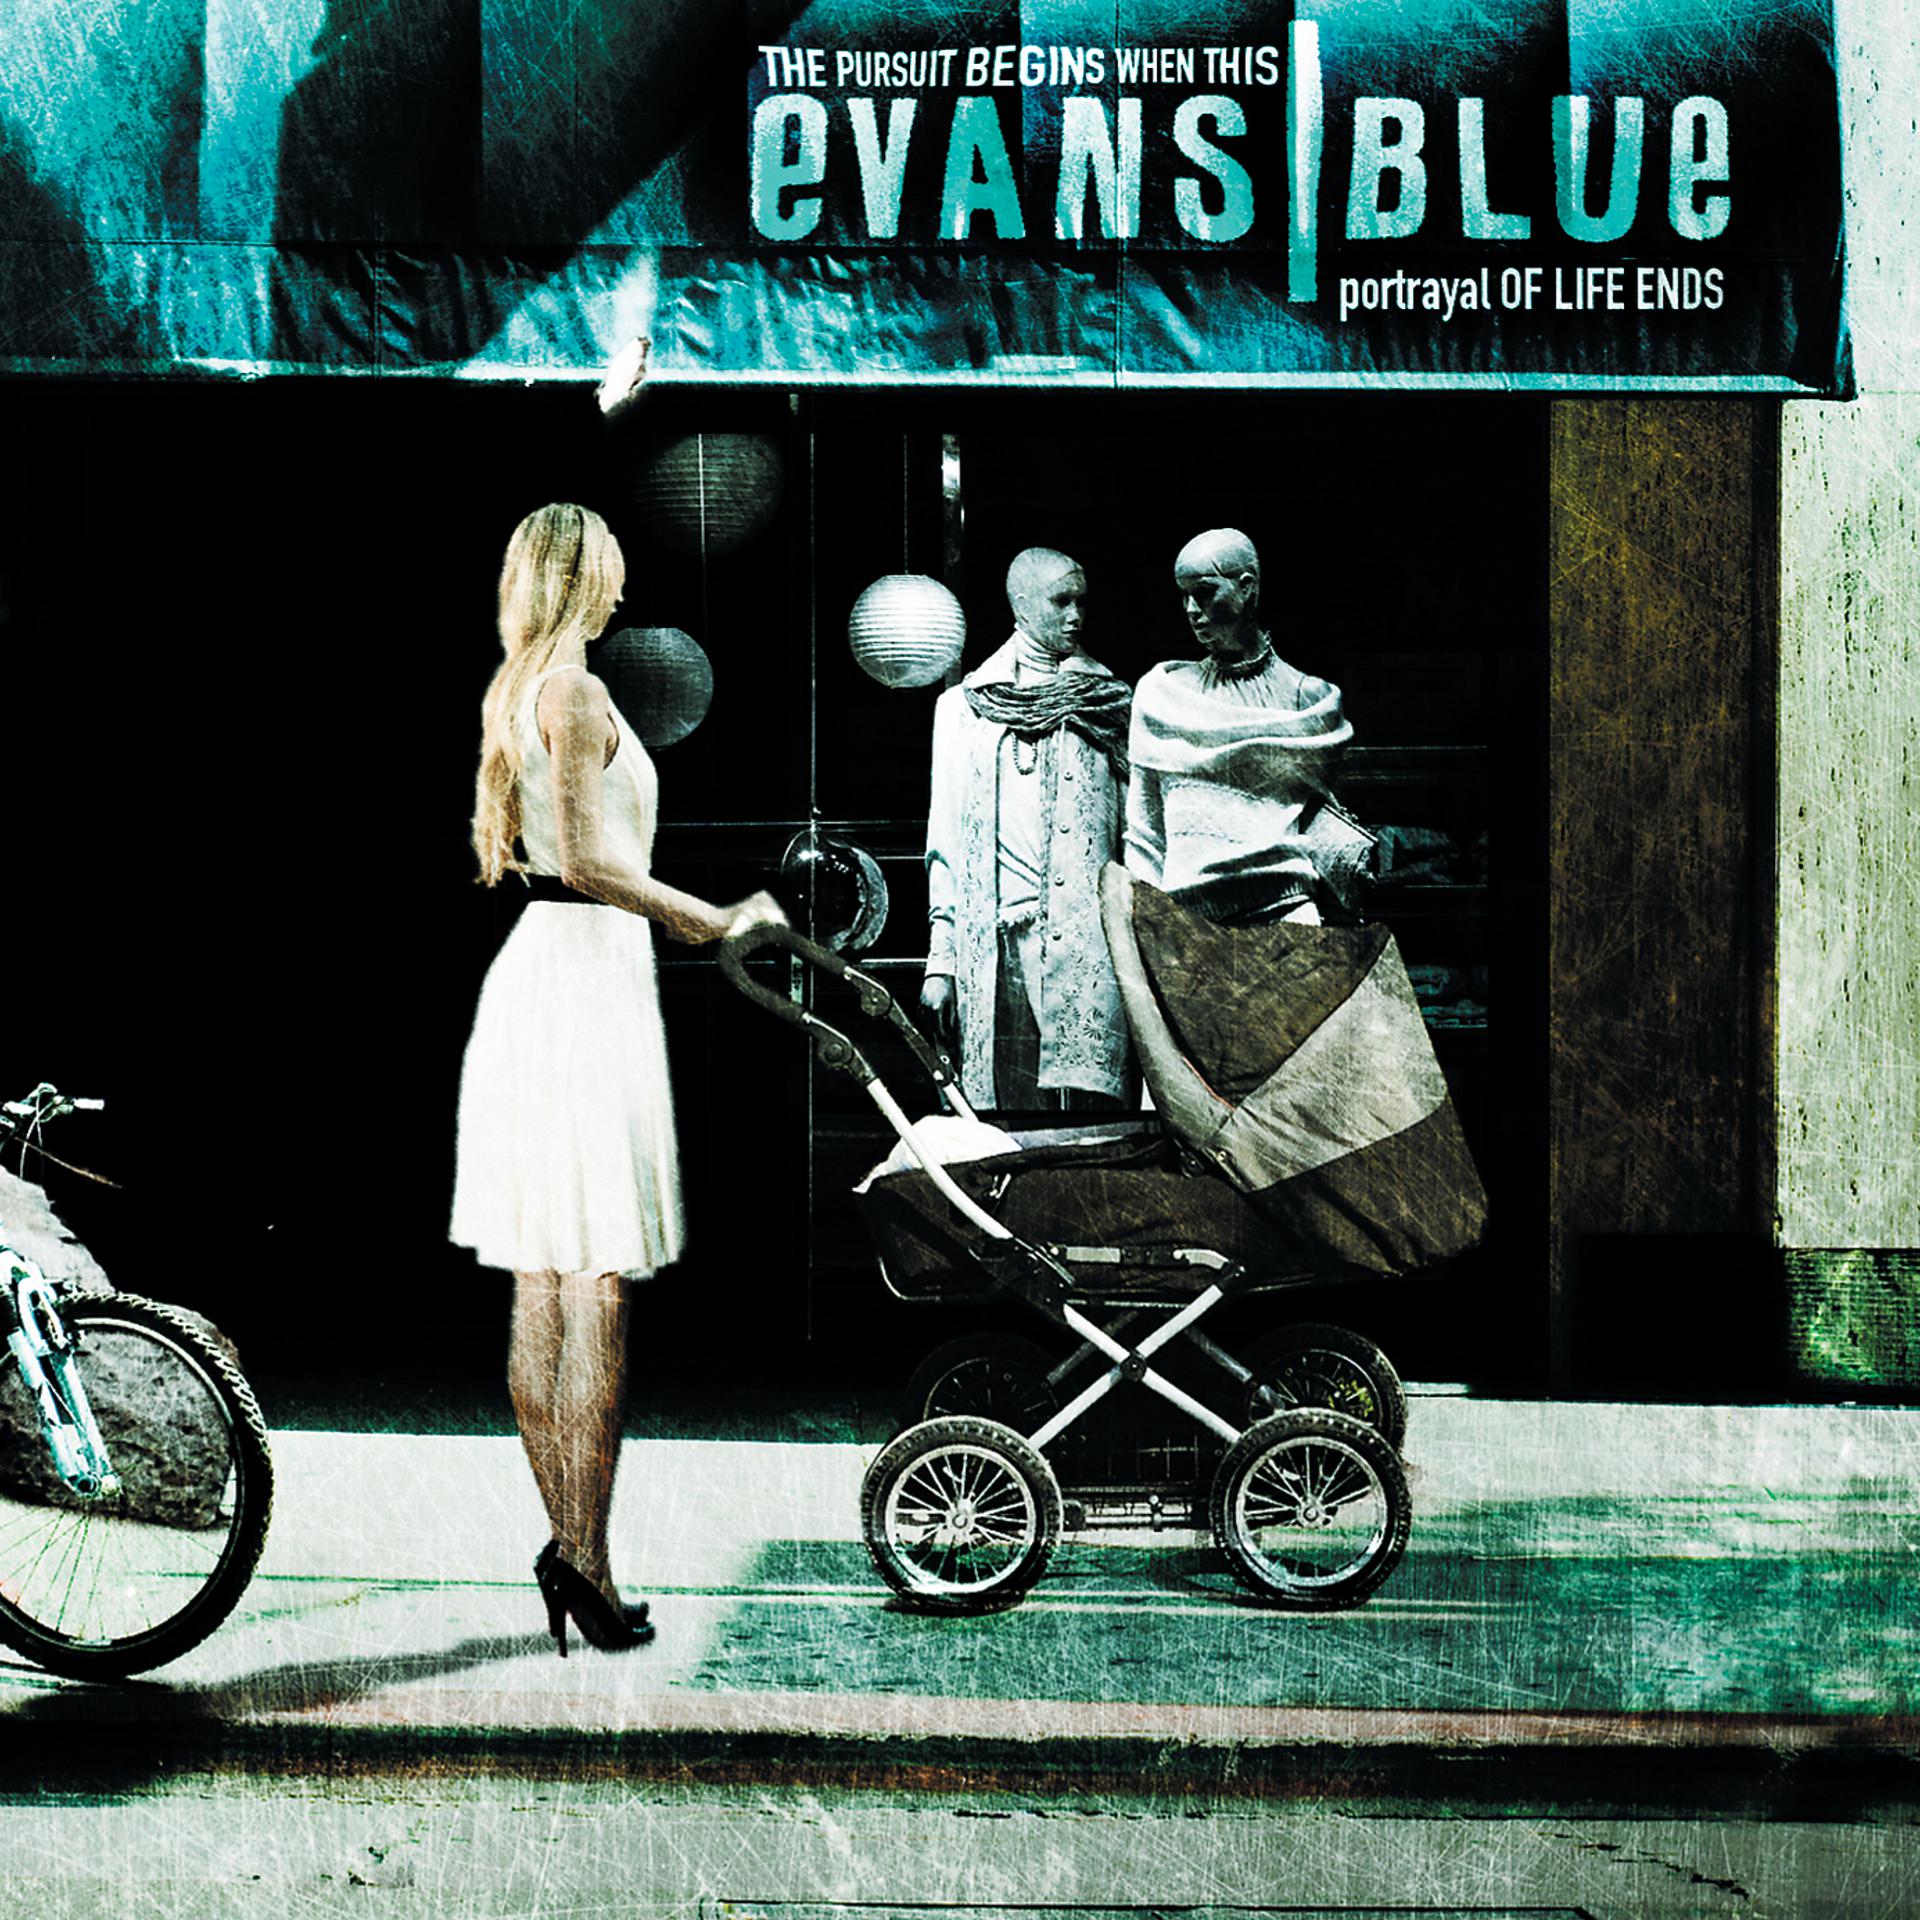 Evans Blue - the Pursuit begins when this portrayal of Life ends (2007). Evans Blue. Evans Blue 2006. Portrayal группа. His life ended